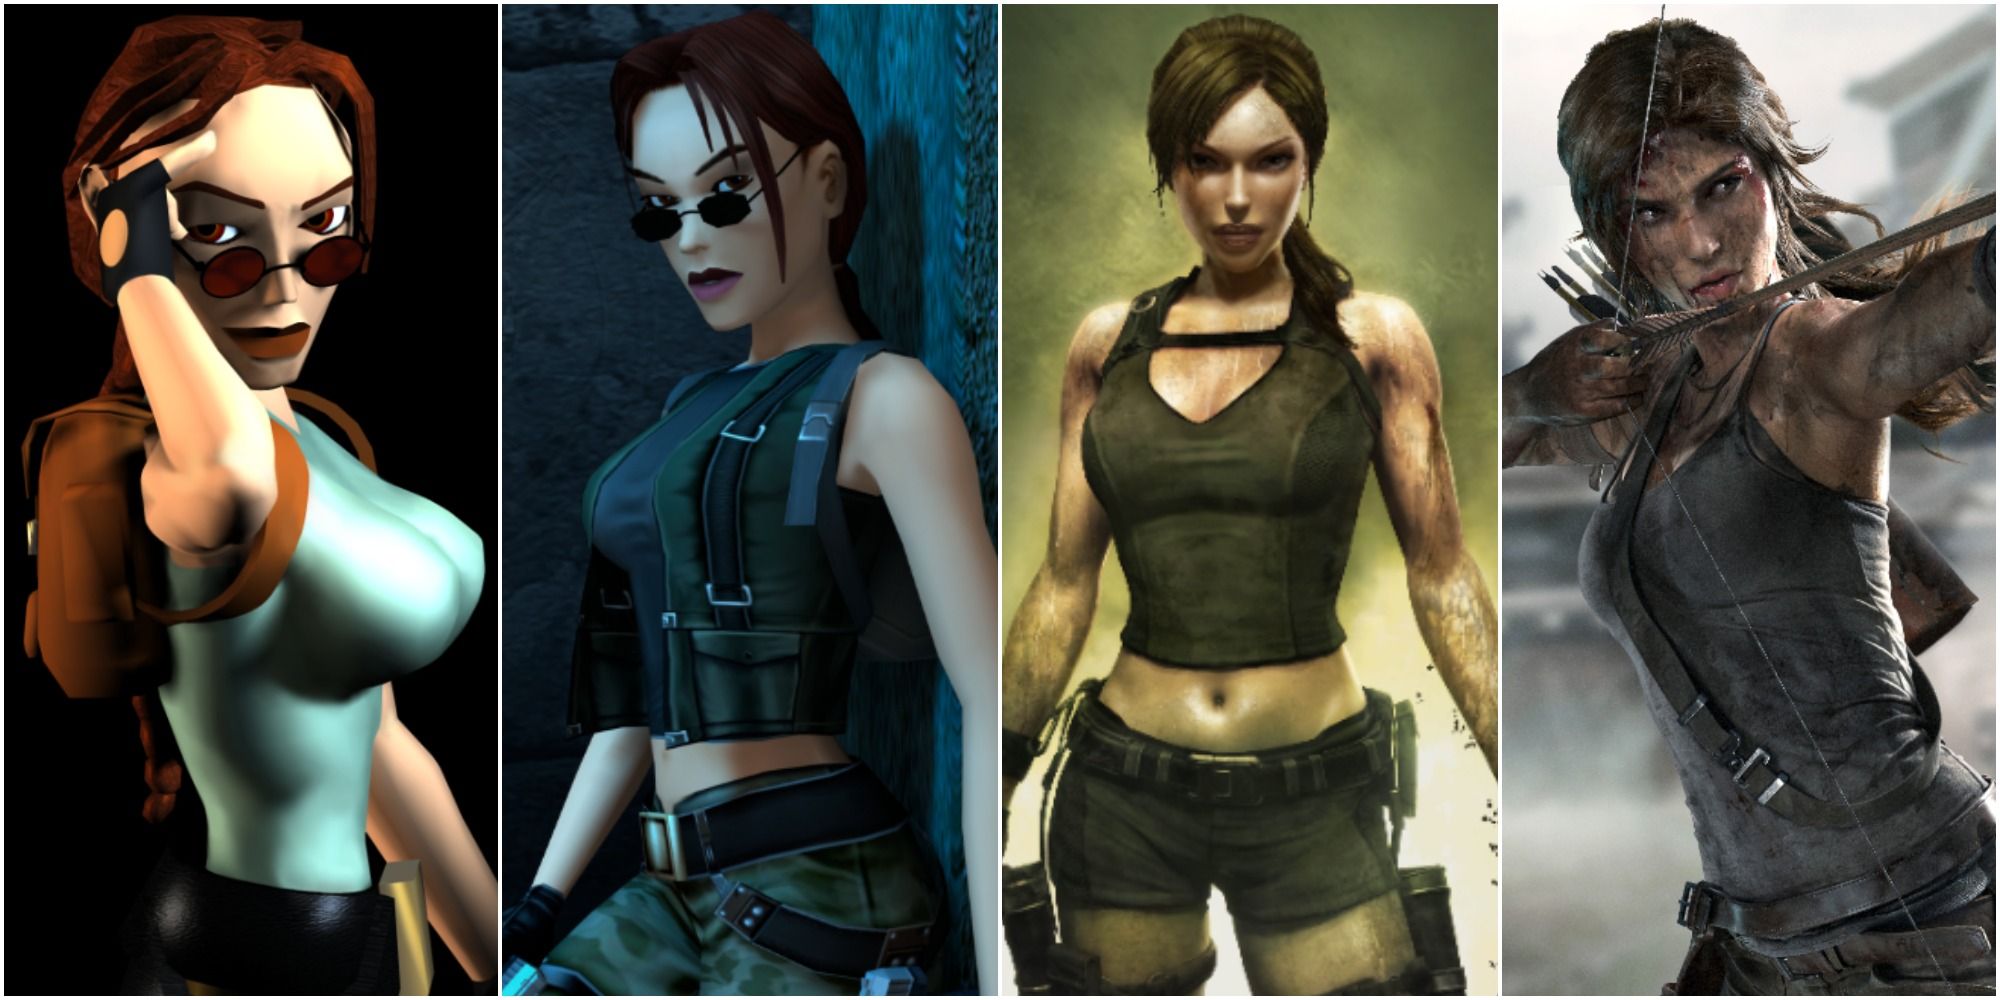 The Many Faces Of Lara Croft in Tomb Raider